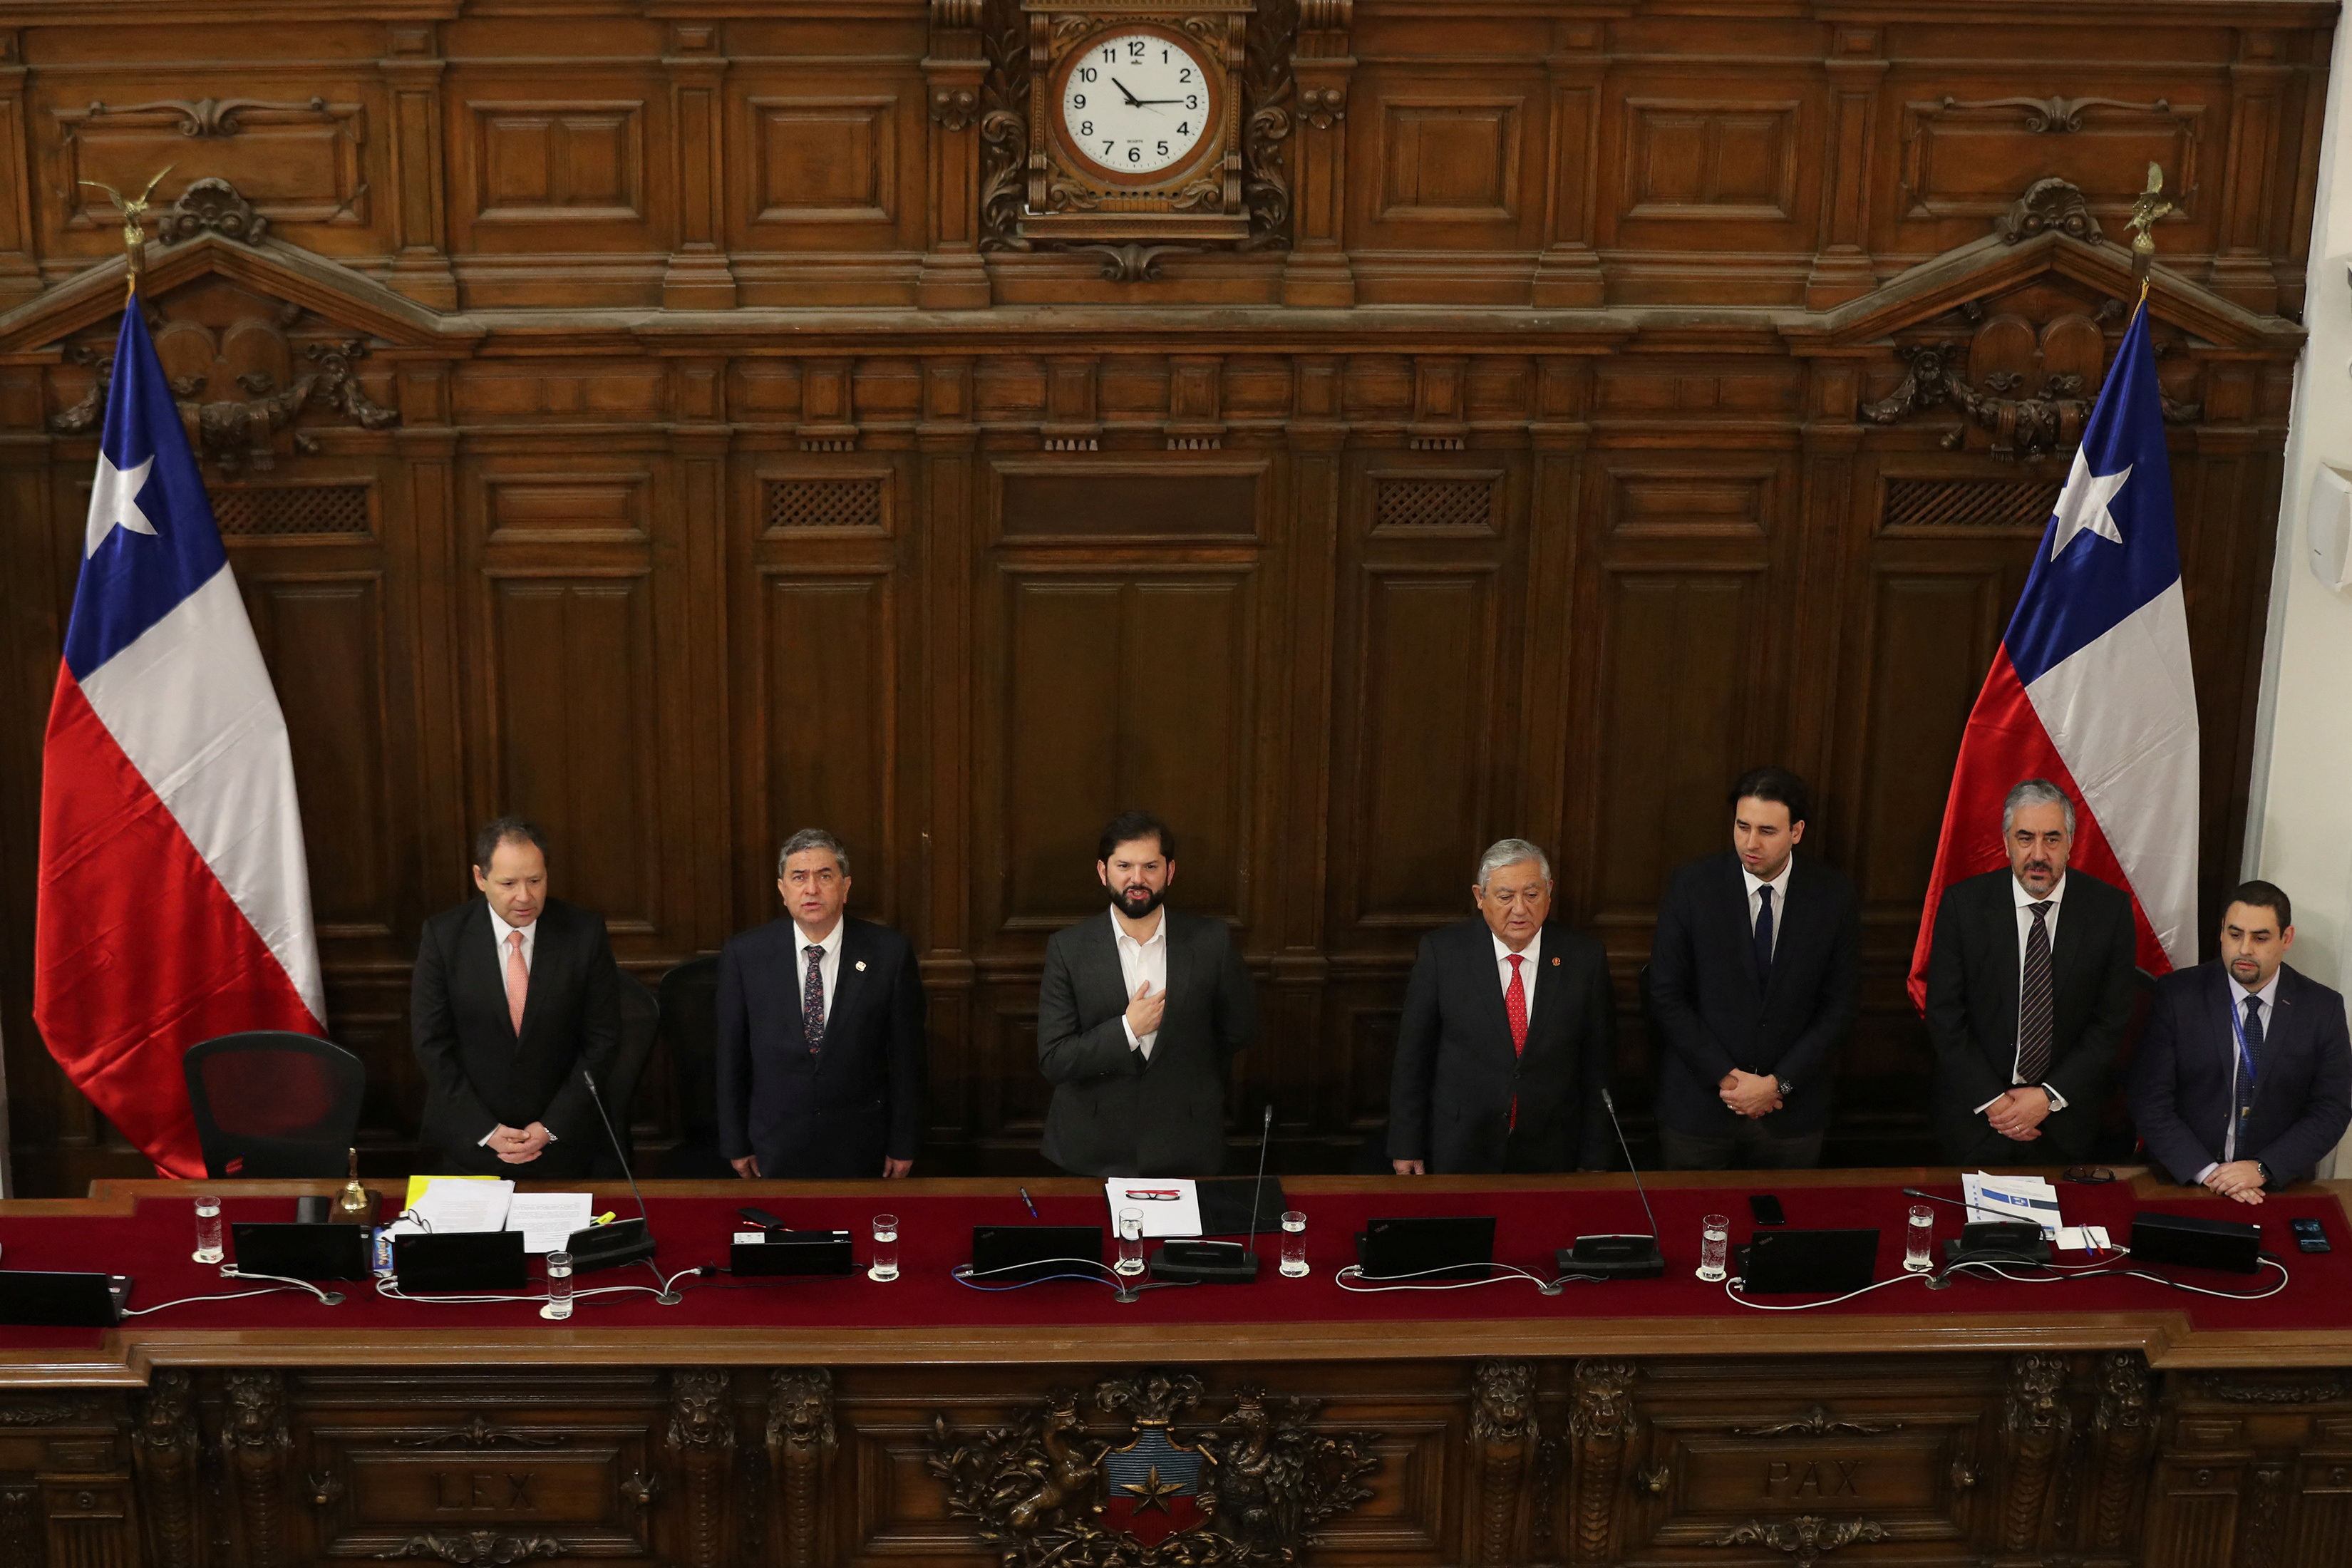 New constitutional council members gather for the first session to draft a new constitution in Santiago